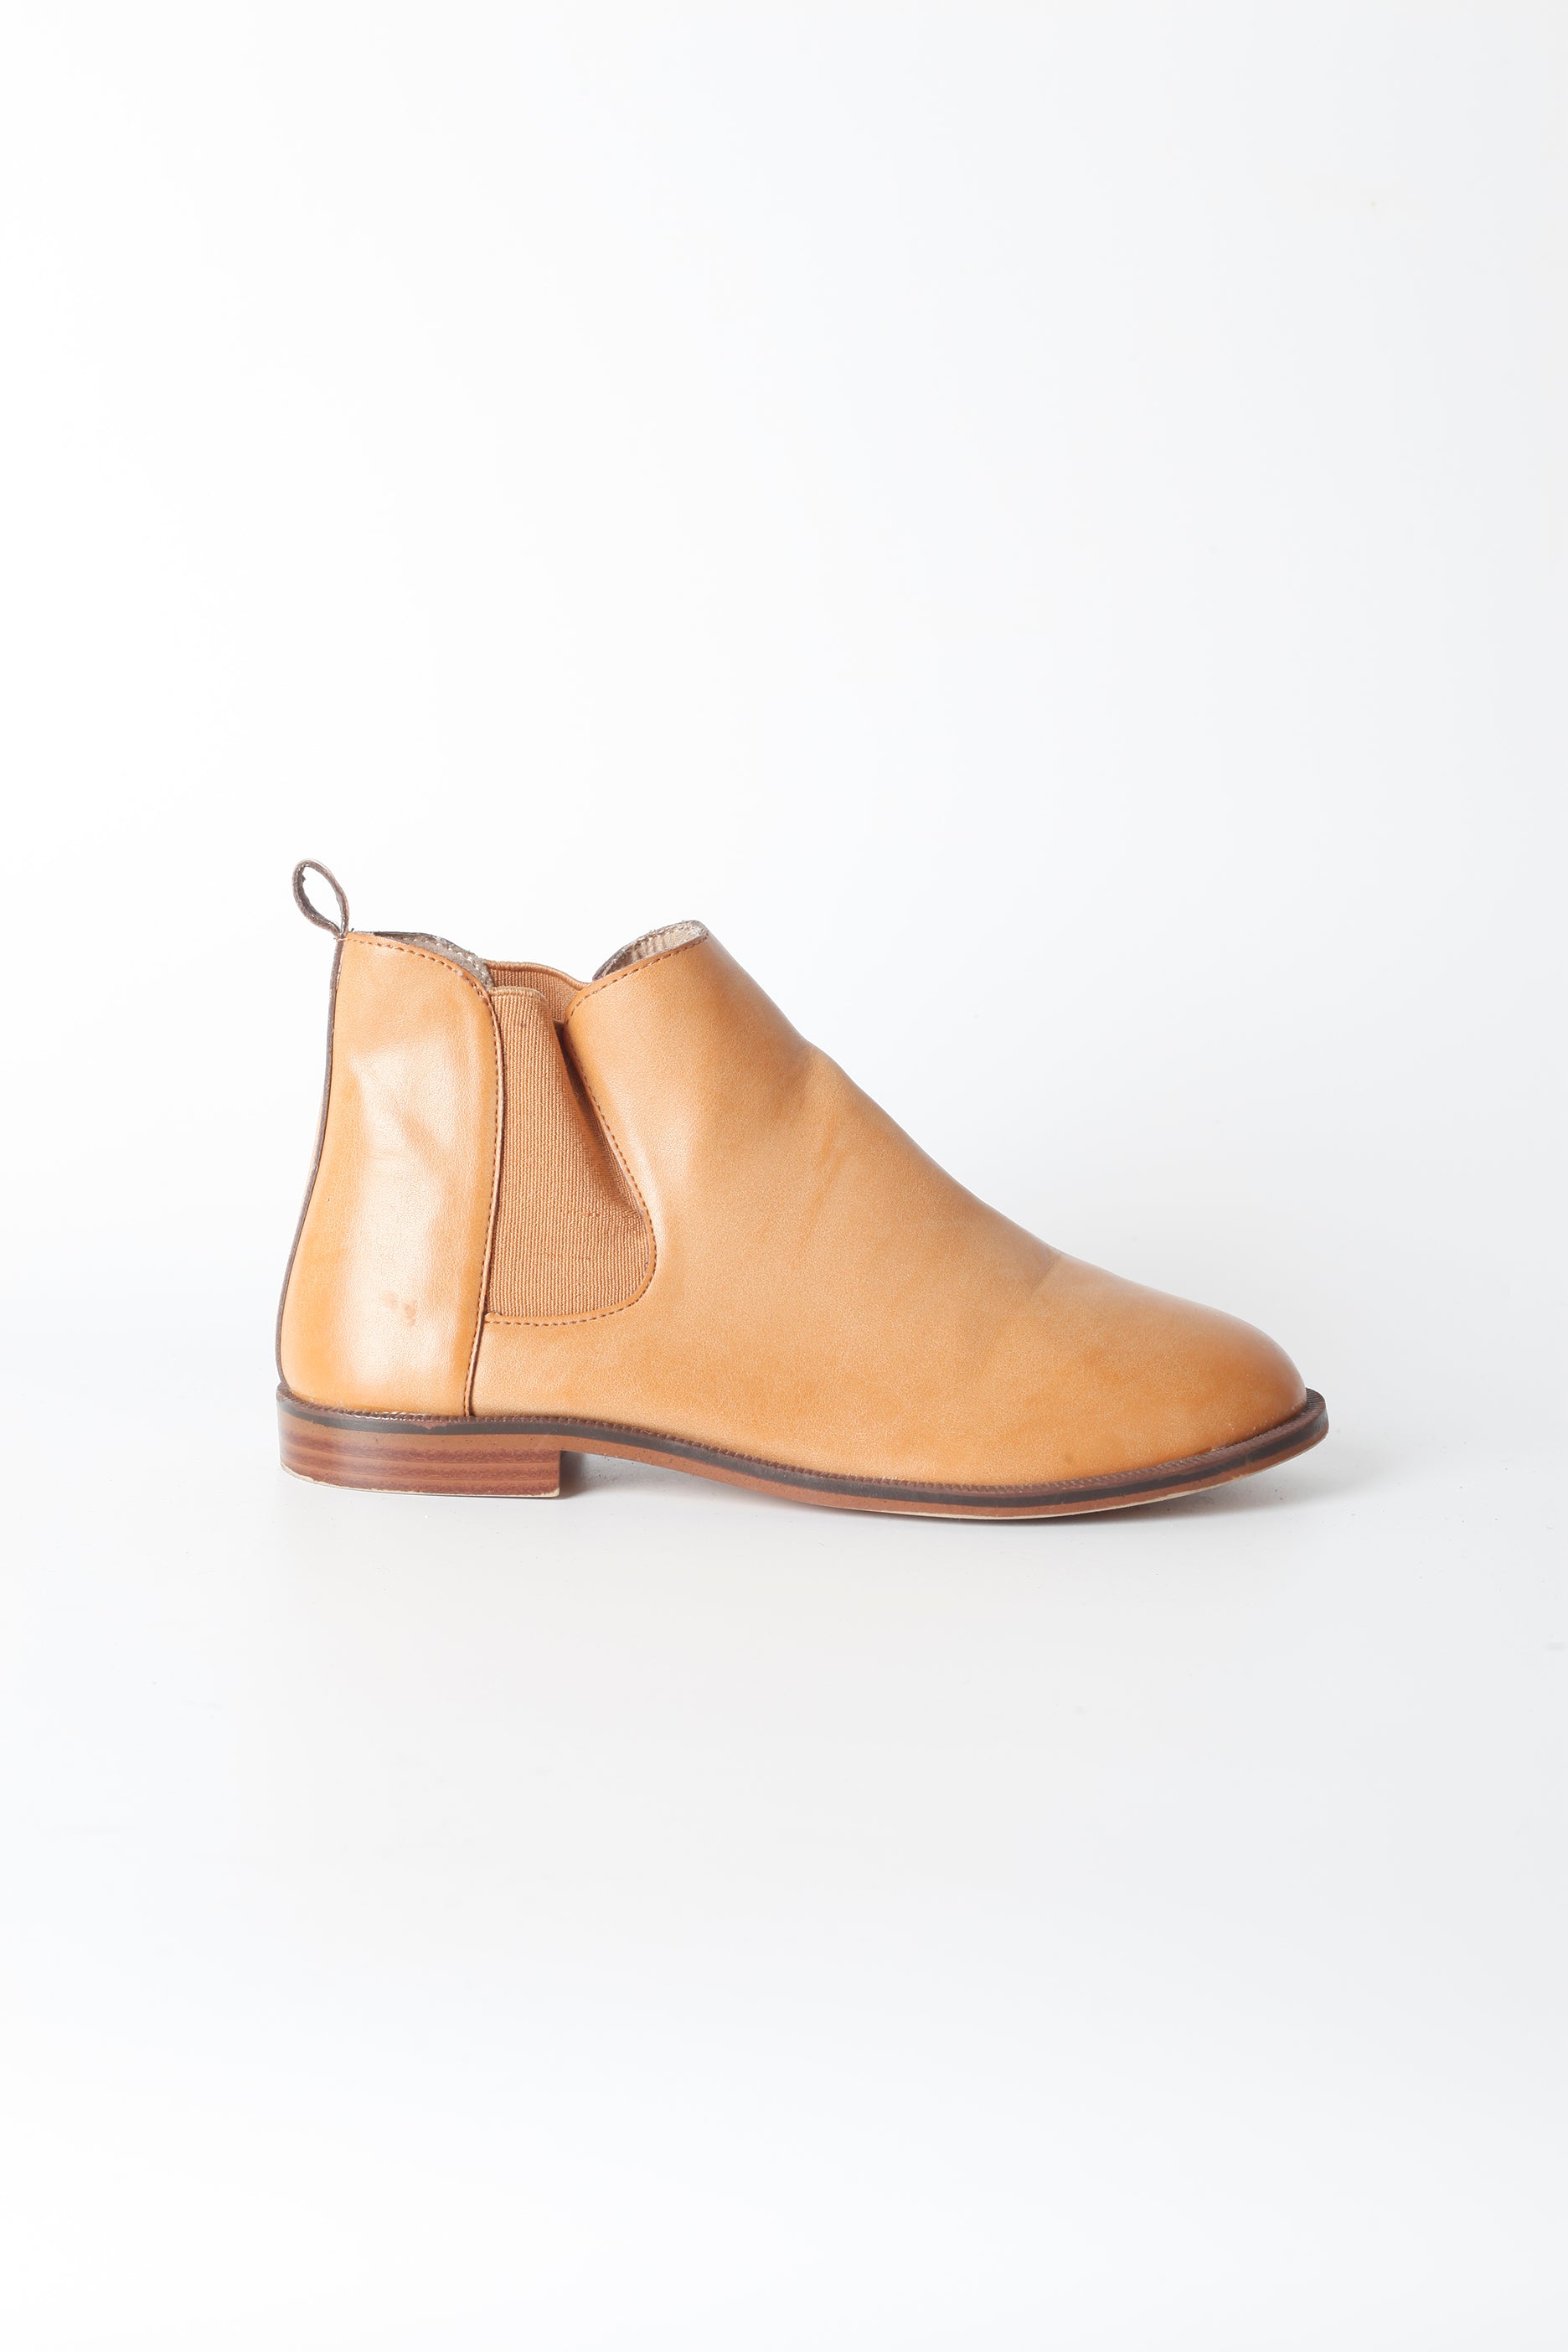 Girls Brown/Tan Leather Chelsea Boots